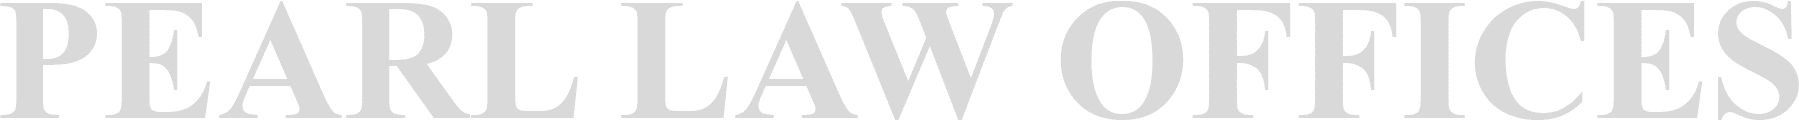 A green and black logo for the w.